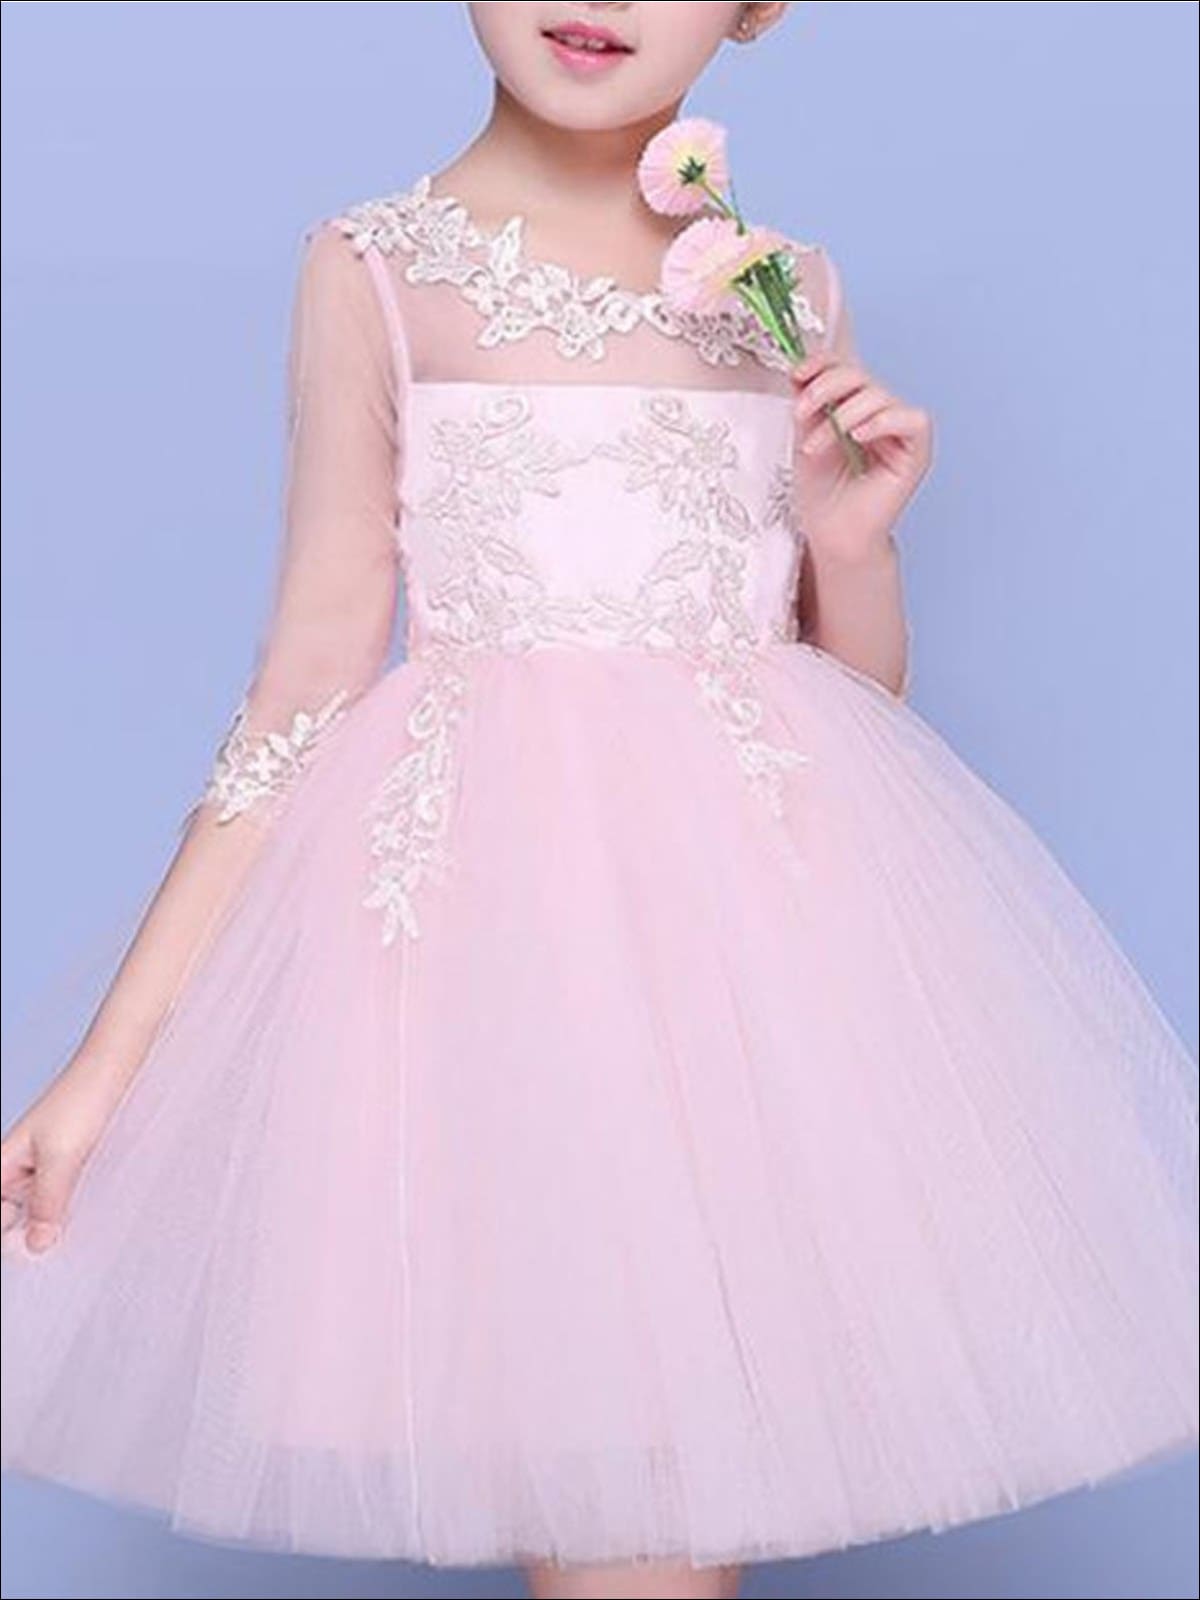 Girls Pink Mesh Long Sleeve Lace Embroidery Communion & Flower Girl Party Dress - Pink / 2T - Girls Gown